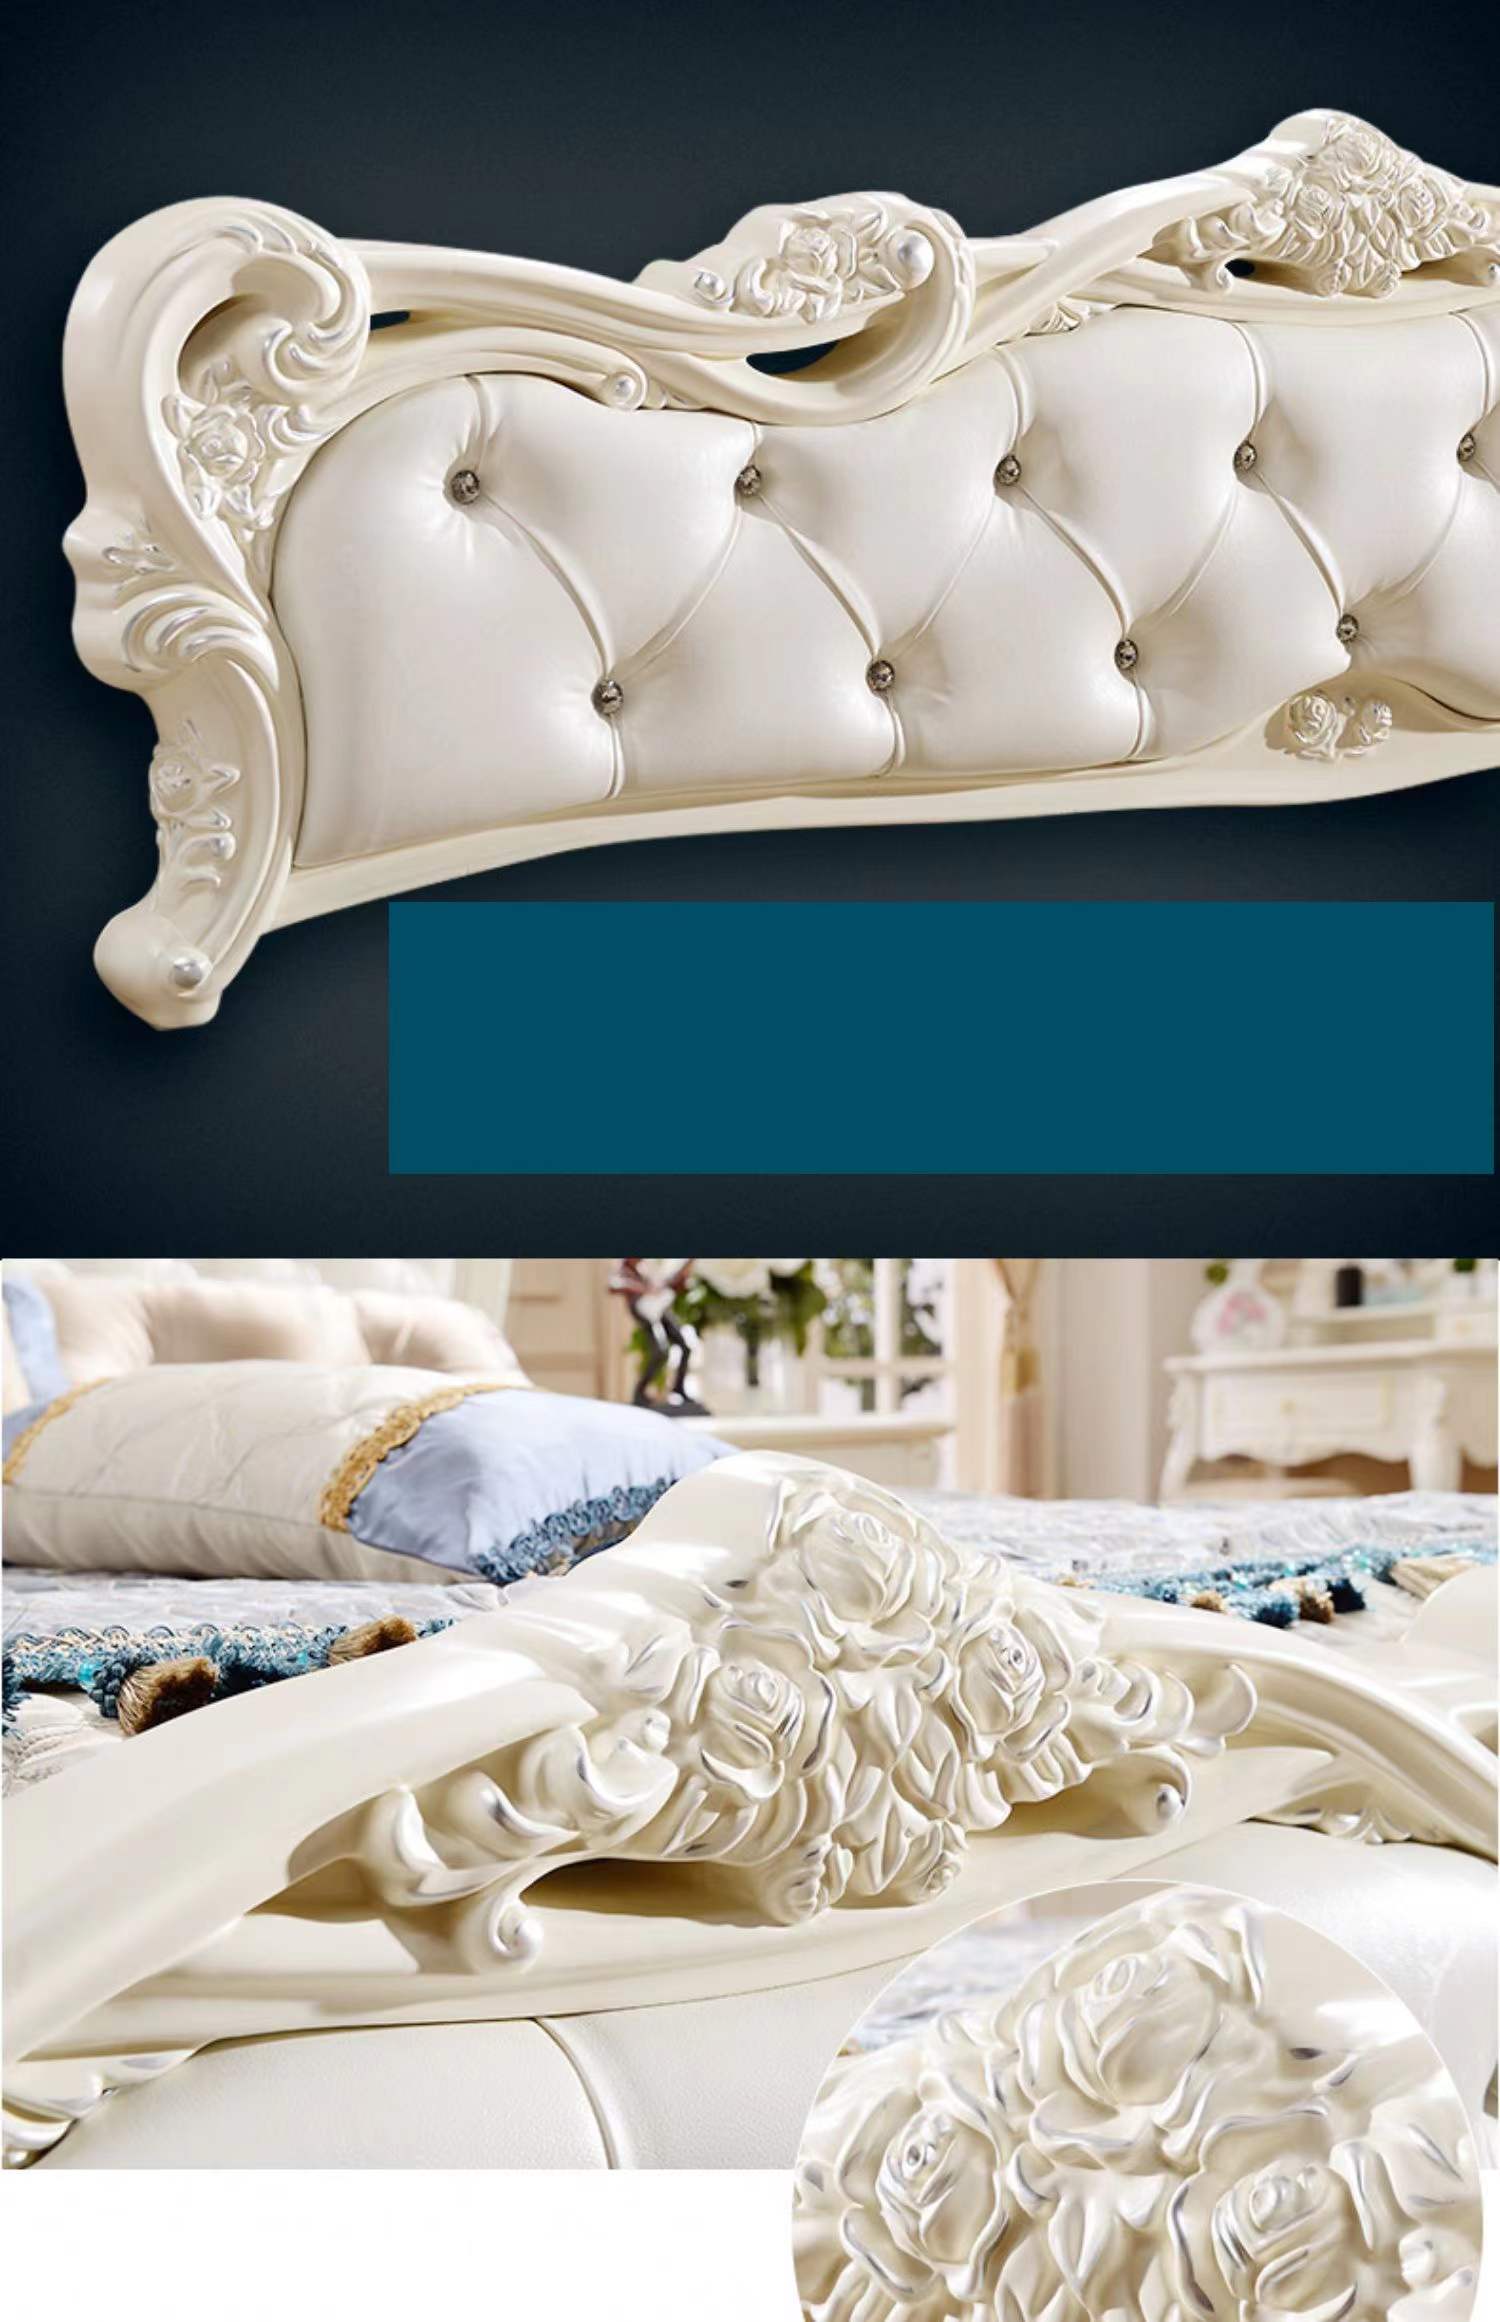 Introducing the X15 Vintage Elegant White Frame White Napa Leather Royal Bedroom Set, a symbol of luxury and sophistication. This set combines the timeless attractiveness of vintage furniture design with the modern durability of Napa leather. The complete set includes a bed, nightstands, dresser, and a mirror, all showcasing exquisite craftsmanship. The bed features a plush Napa leather headboard creating a comfortable reading nook to enjoy your favorite book. Nightstands provide ample storage with elegant hardware to add a touch of glamour. Dresser with a spacious tabletop and multiple drawers offers enough room to store your essentials. The mirror framed in white complements the overall aesthetic of the set while making your room appear larger and brighter. It's not just a place to sleep, but an expression of your taste, a sanctuary at the end of the day, and a statement to anyone who enters. Invest in the X15 Vintage Elegant White Frame White Napa Leather Royal Bedroom Set, and you're investing in more than just objects but an elevated living experience.